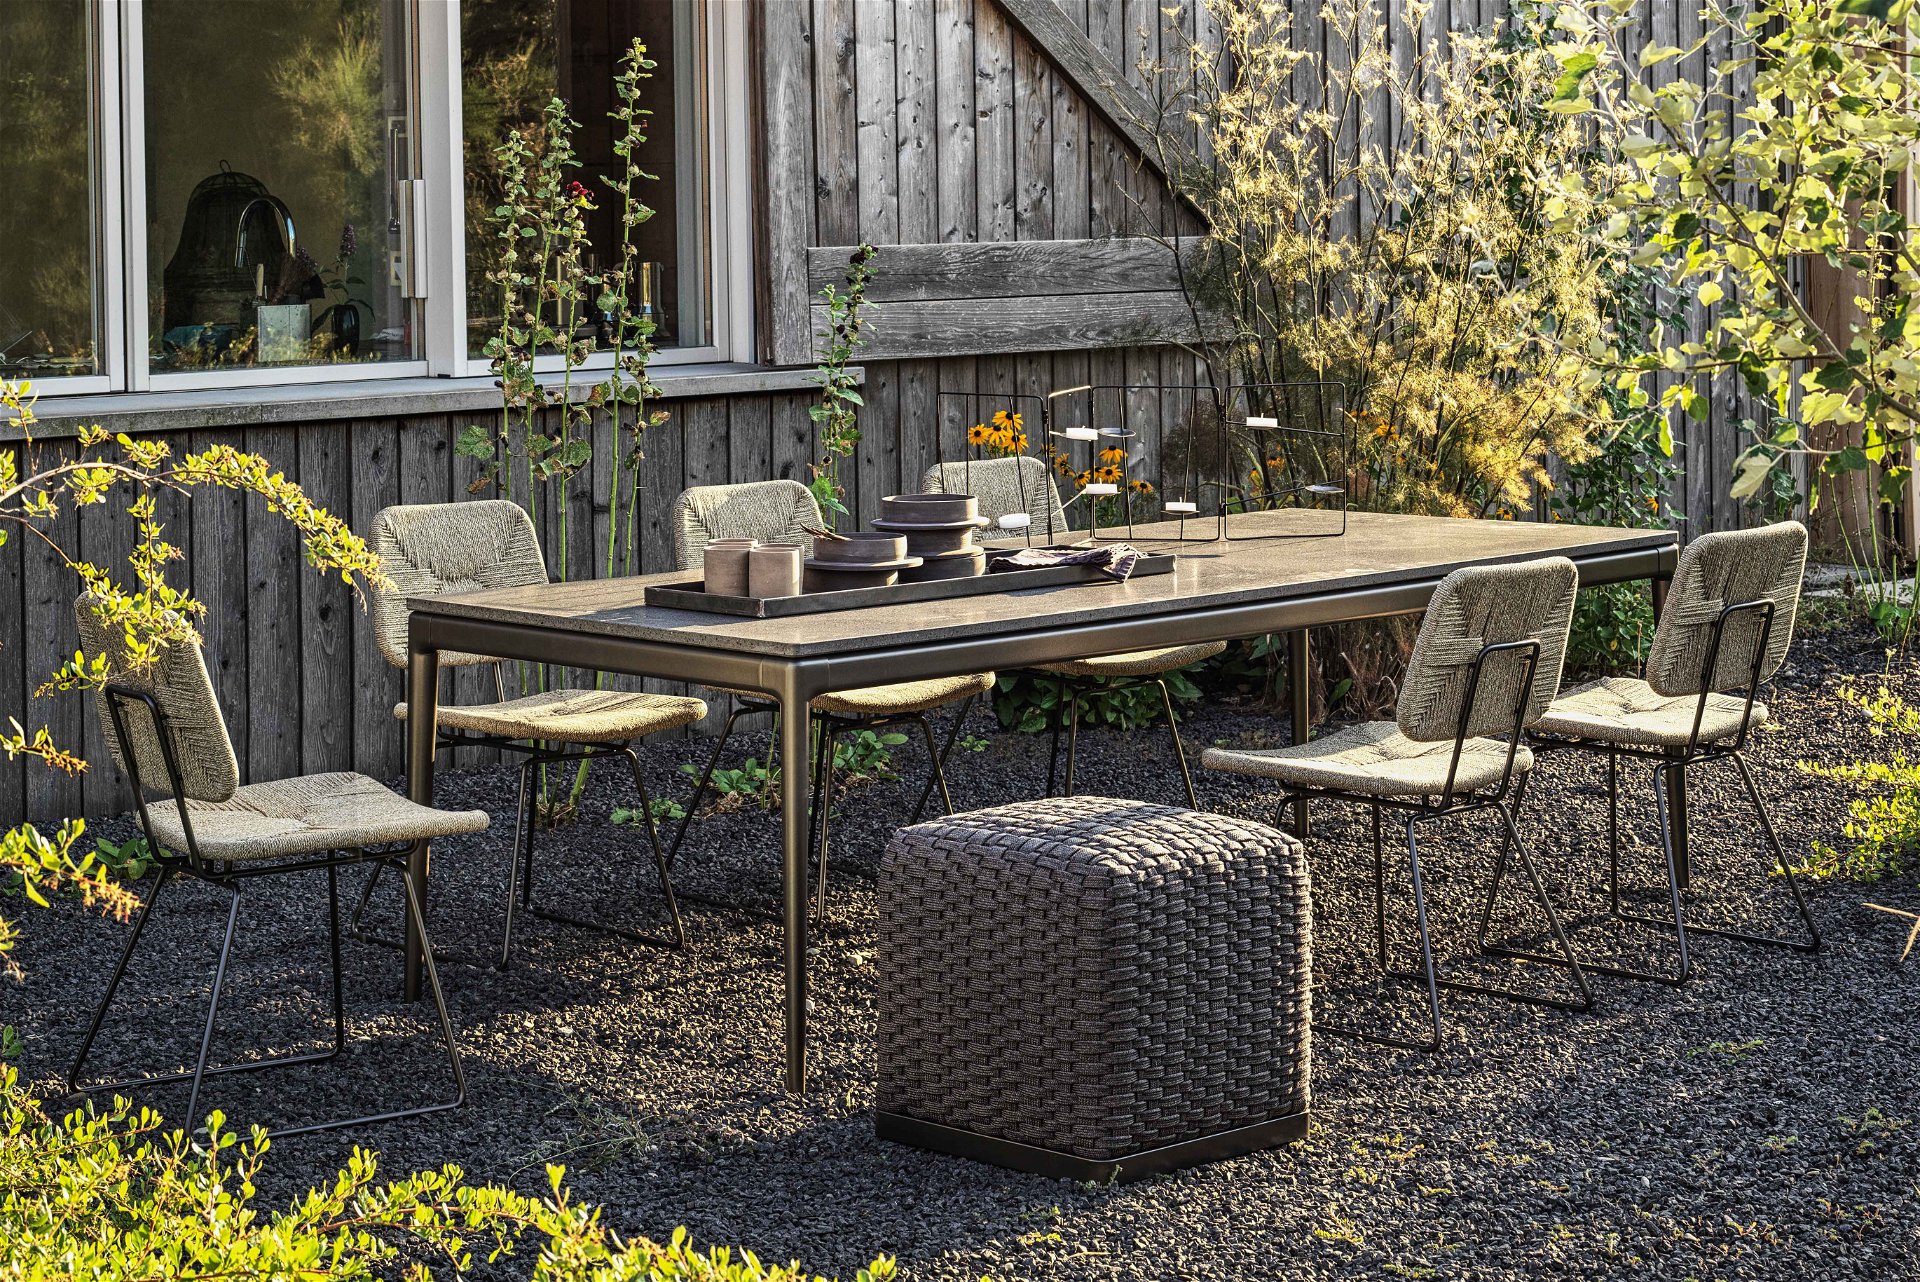 Echoes Outdoor dining chair, Pico Outdoor table, Phuket ottoman.